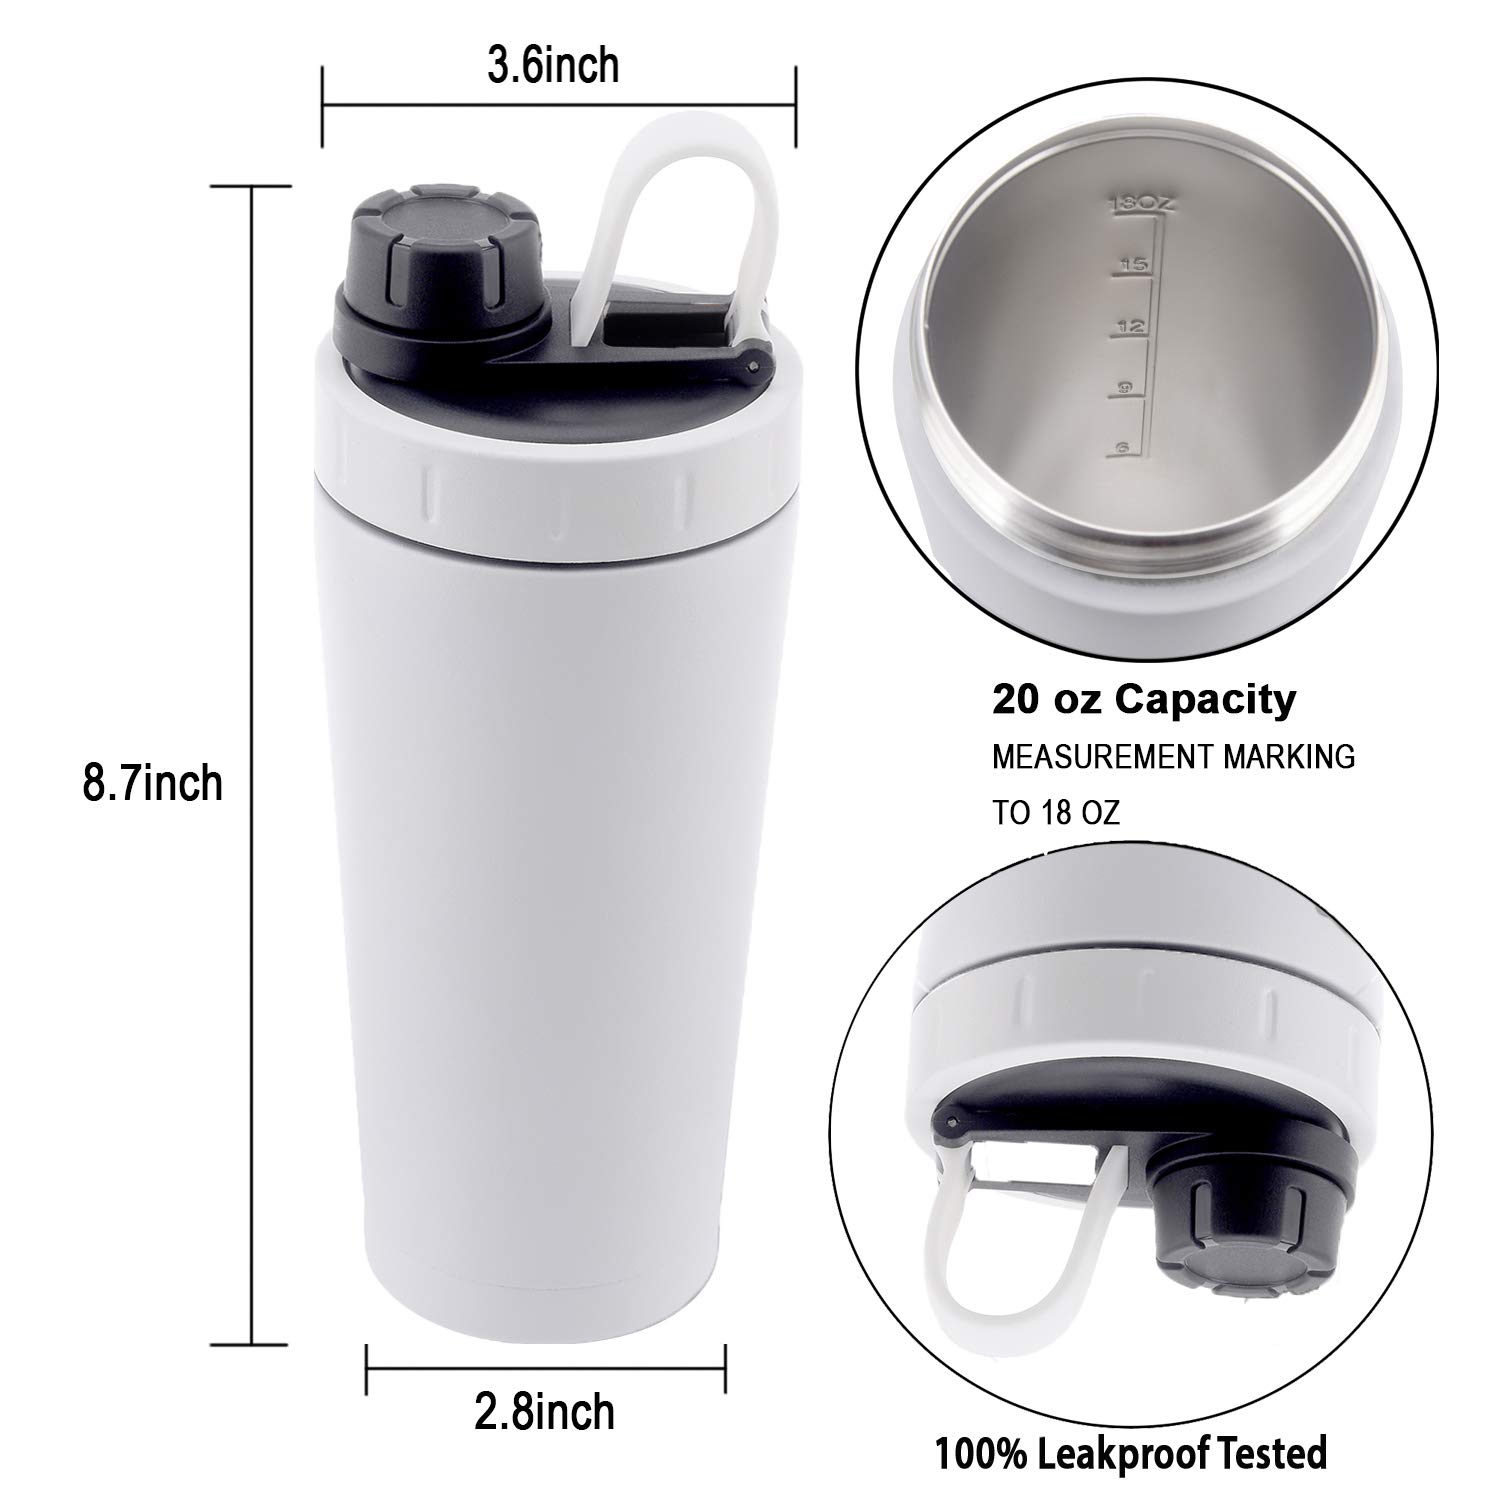 Stainless Steel Protein Shaker Bottle Insulated Keeps Hot/Cold Dishwasher Safe/Double Wall/Odor Resistant/Sweatproof/Leakproof/Durable 20 oz (White)…